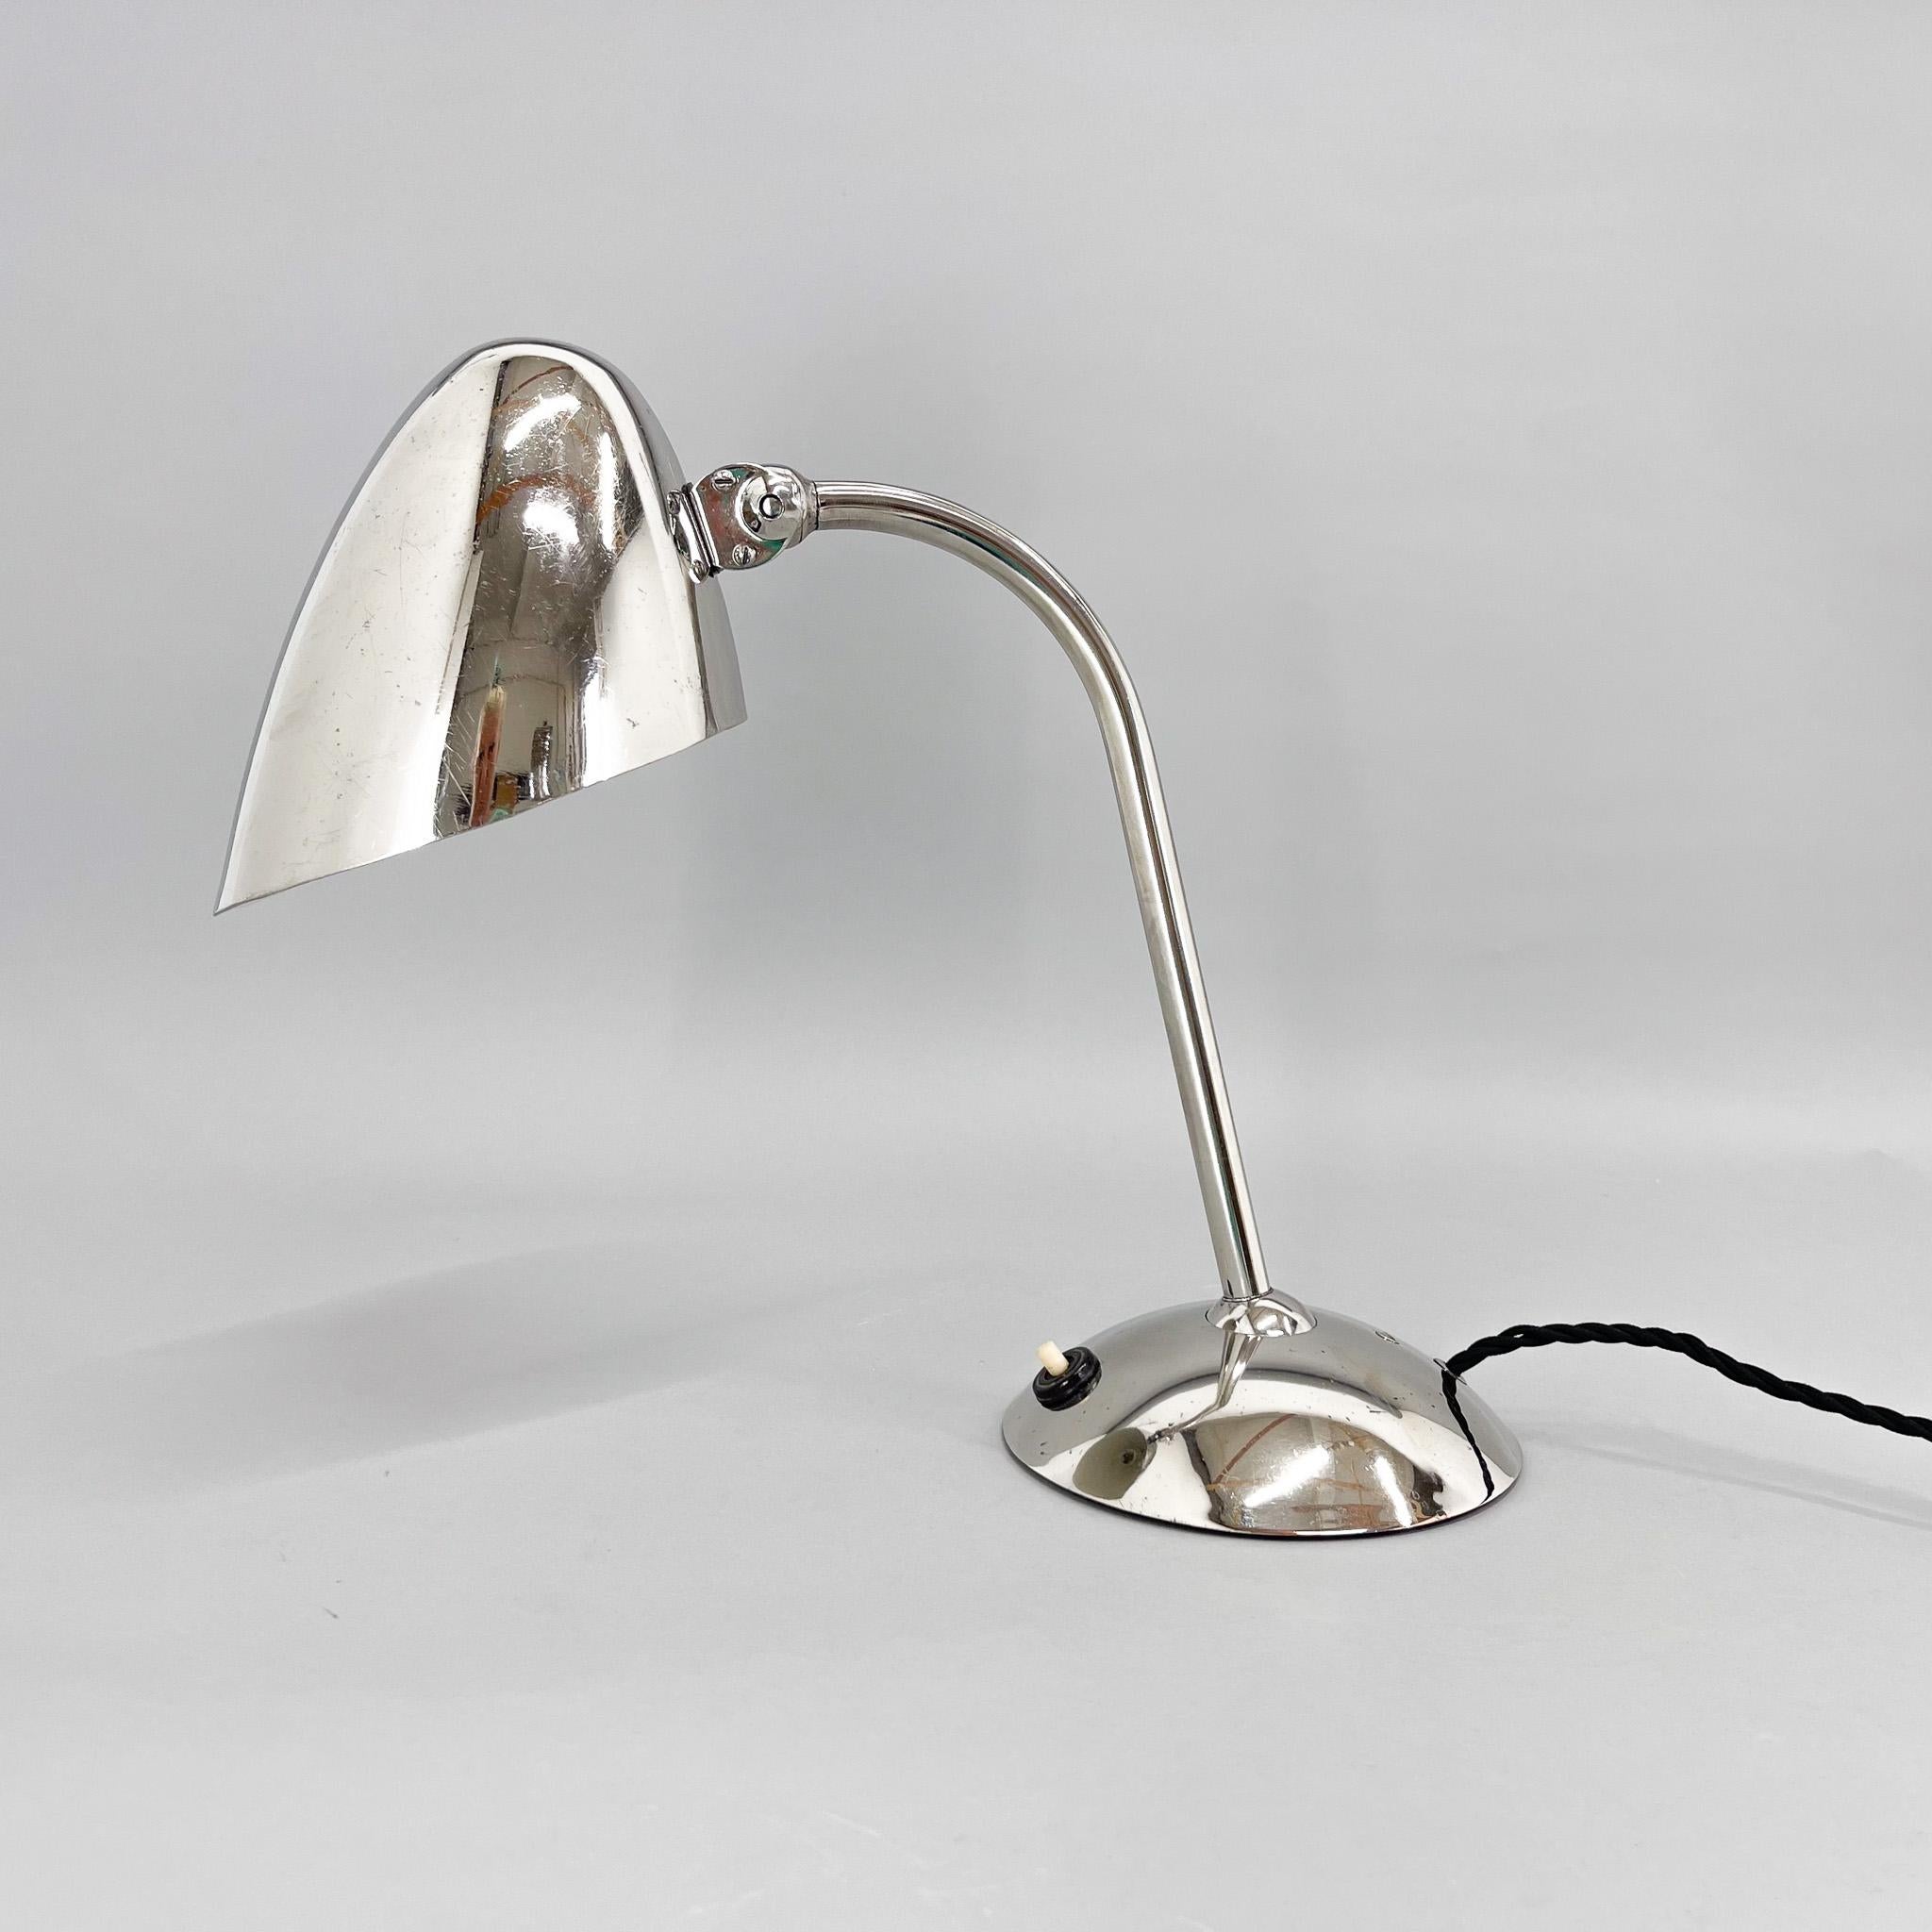 Mid-20th Century Functionalist / Bauhaus Flexible Table Lamp by Franta Anyz, 1930s For Sale